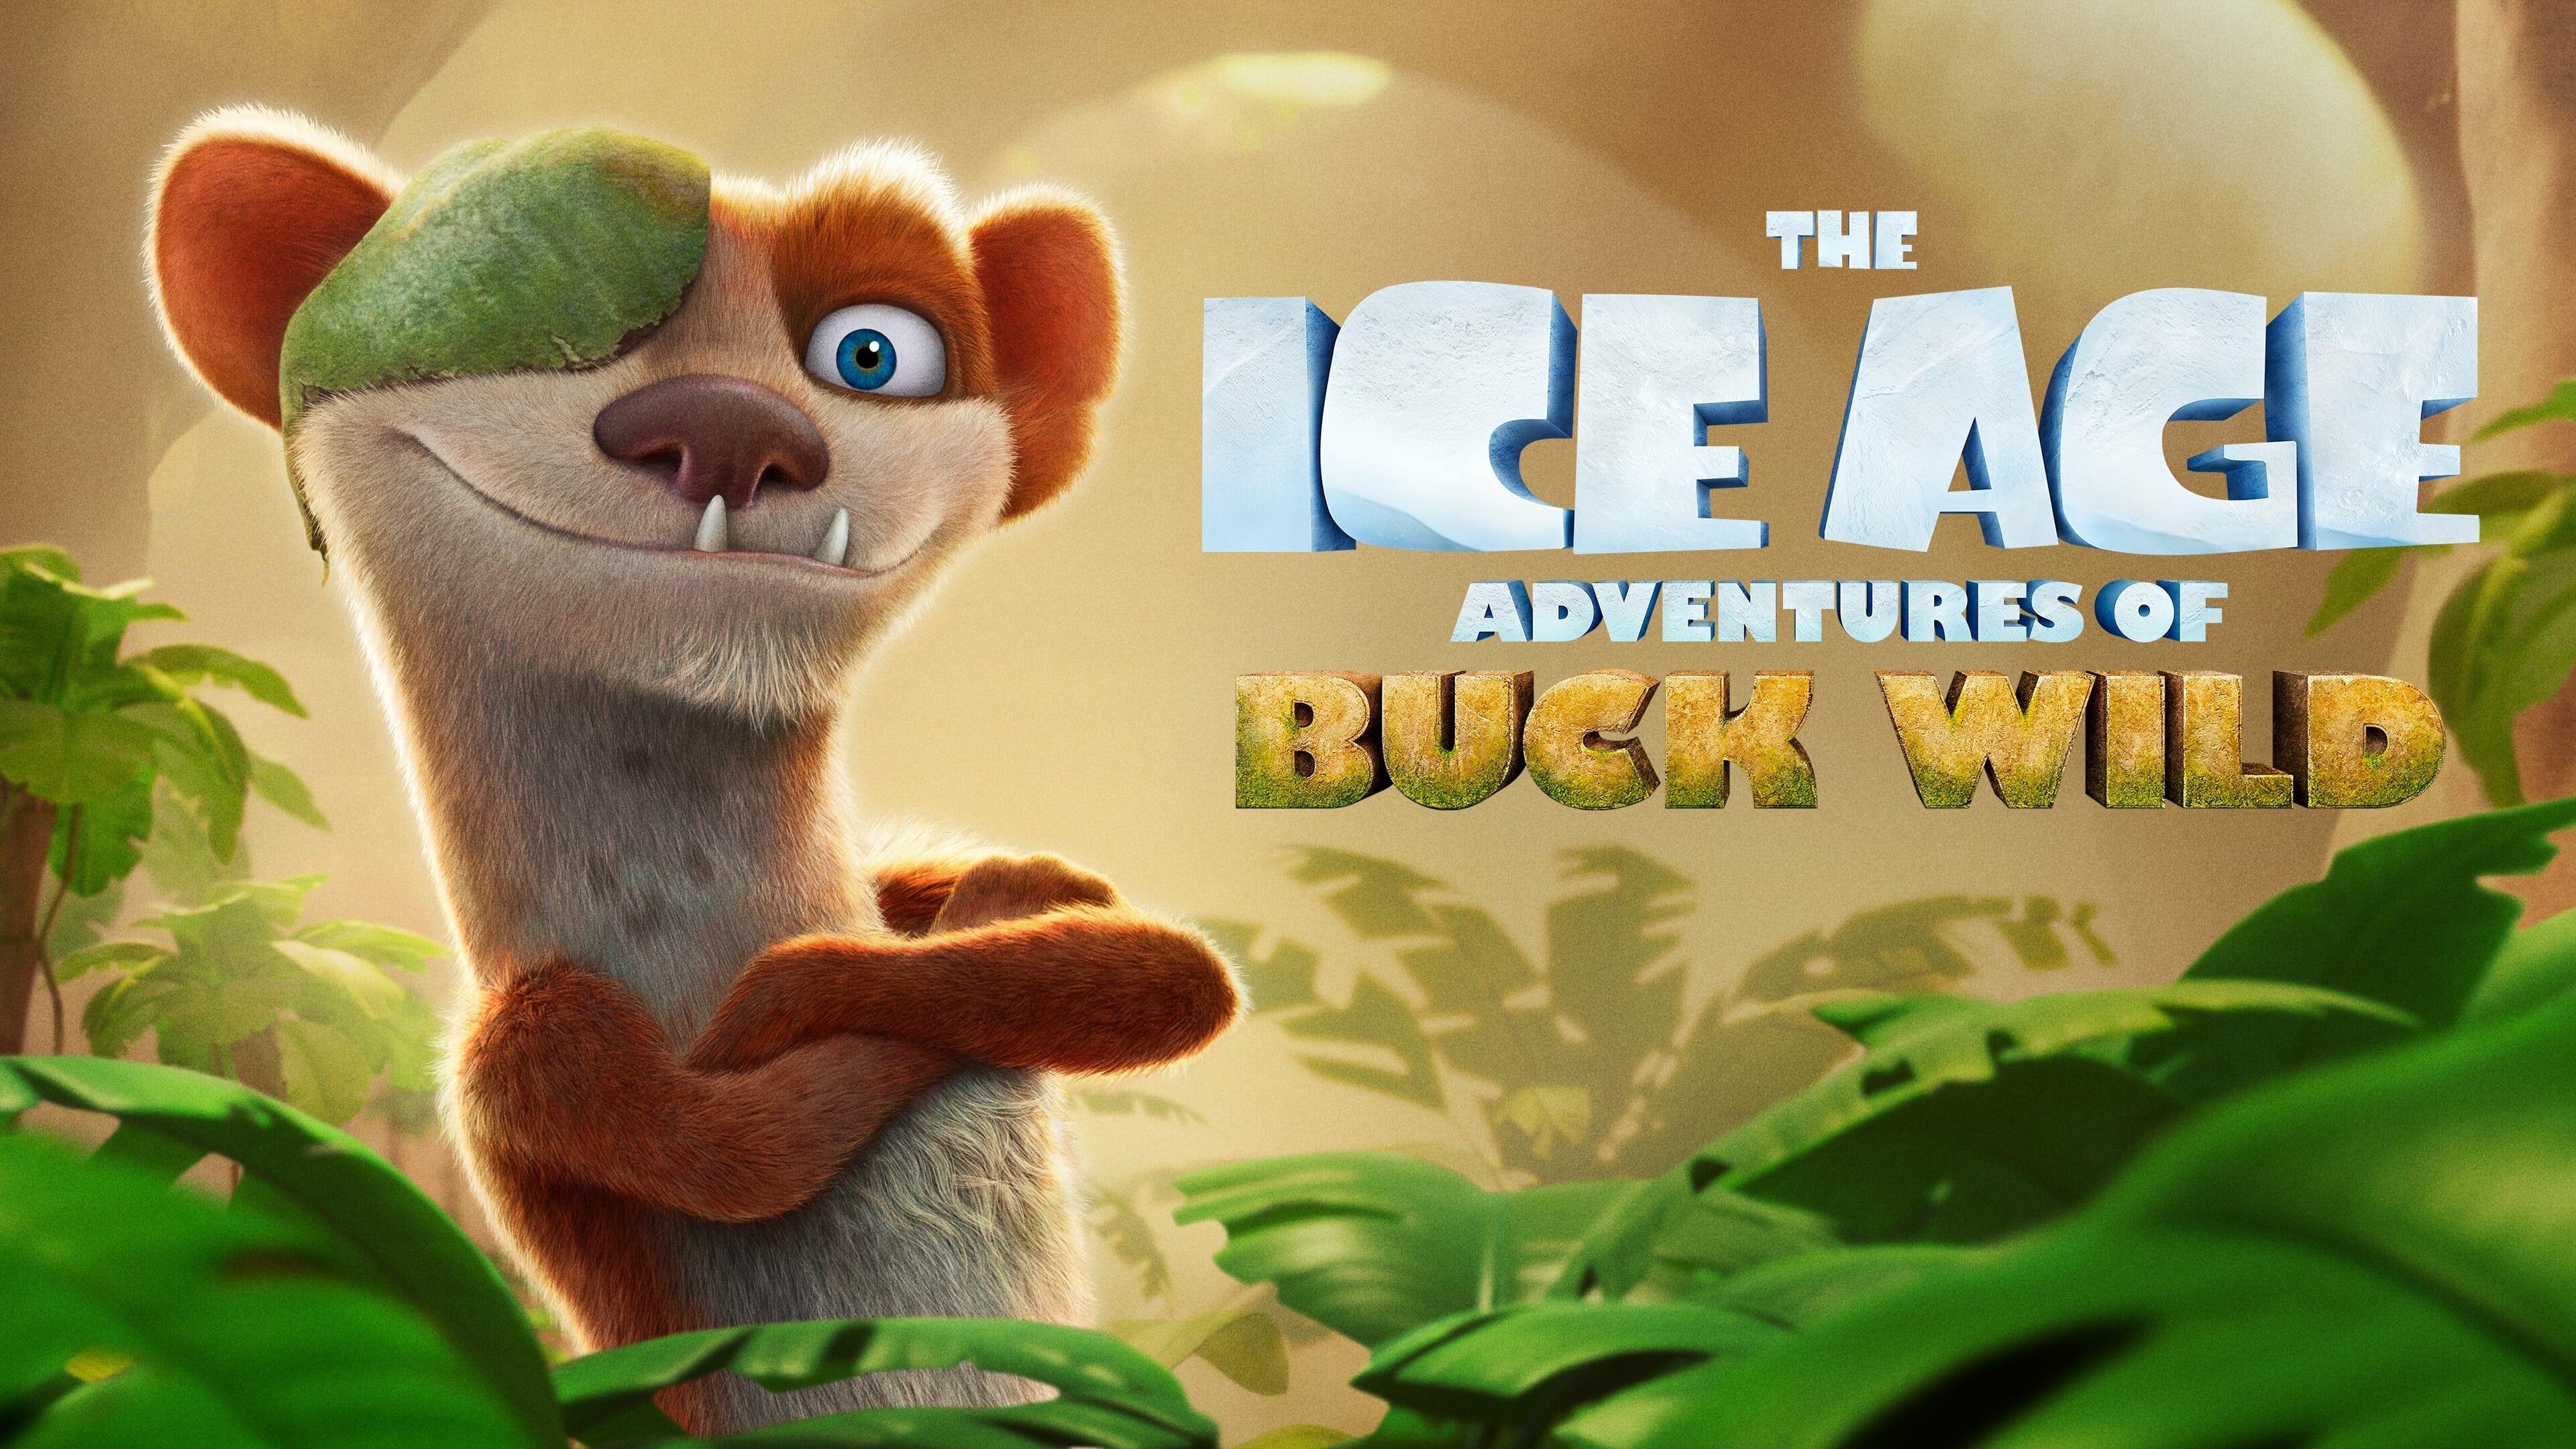 Ice Age: Adventures of Buck Wild: A comedy film with a Disney+ premiere date of January 28, 2022. 3840x2160 4K Wallpaper.